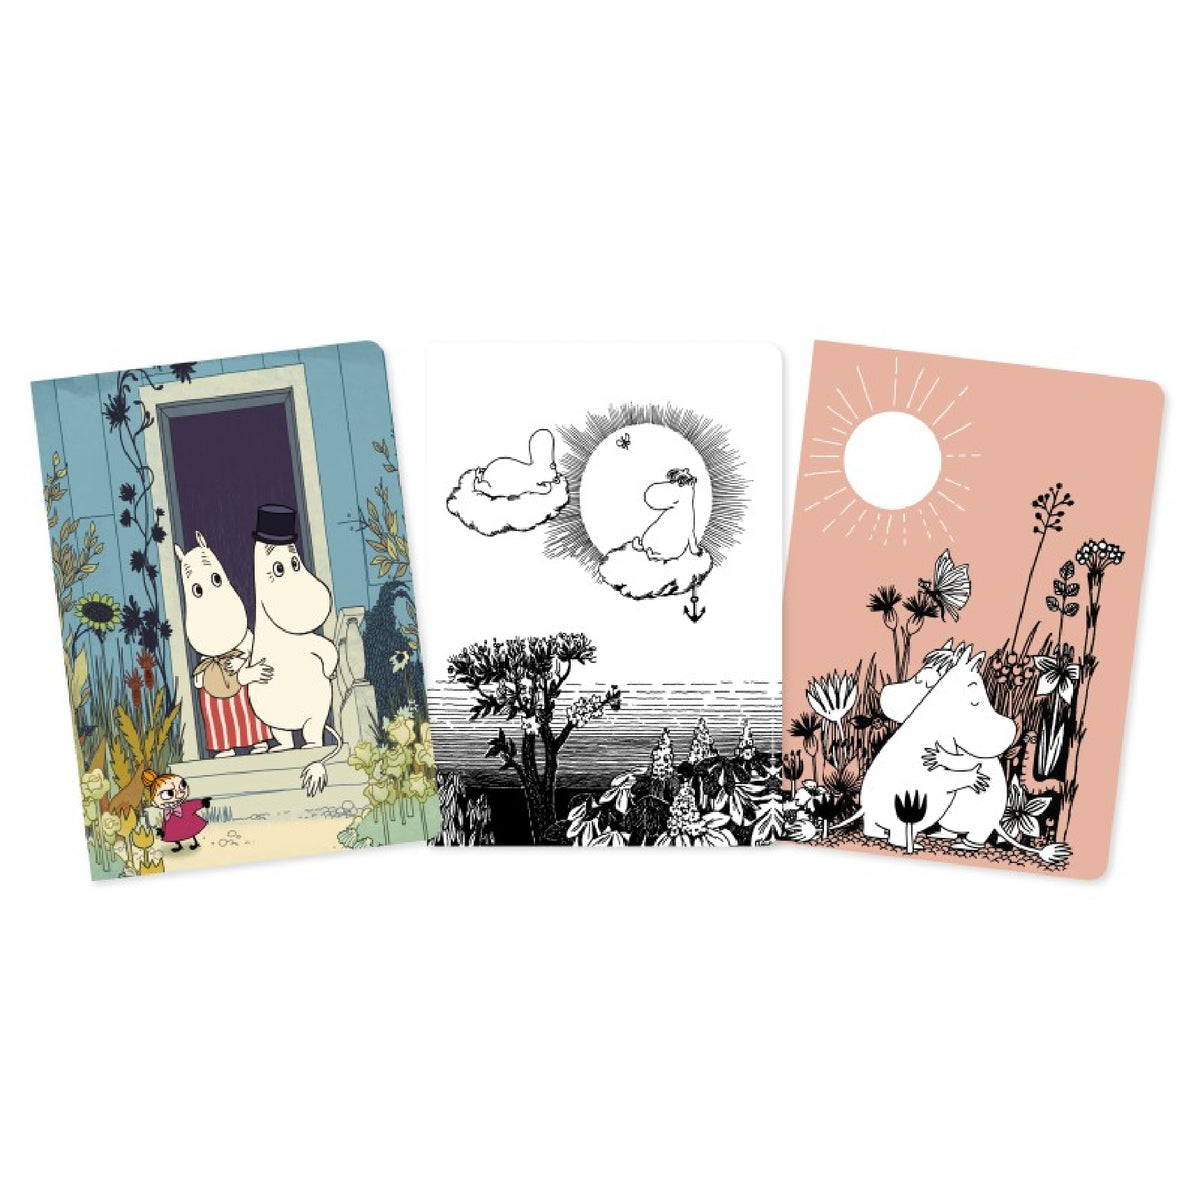 Moomin Standard Notebook Collection